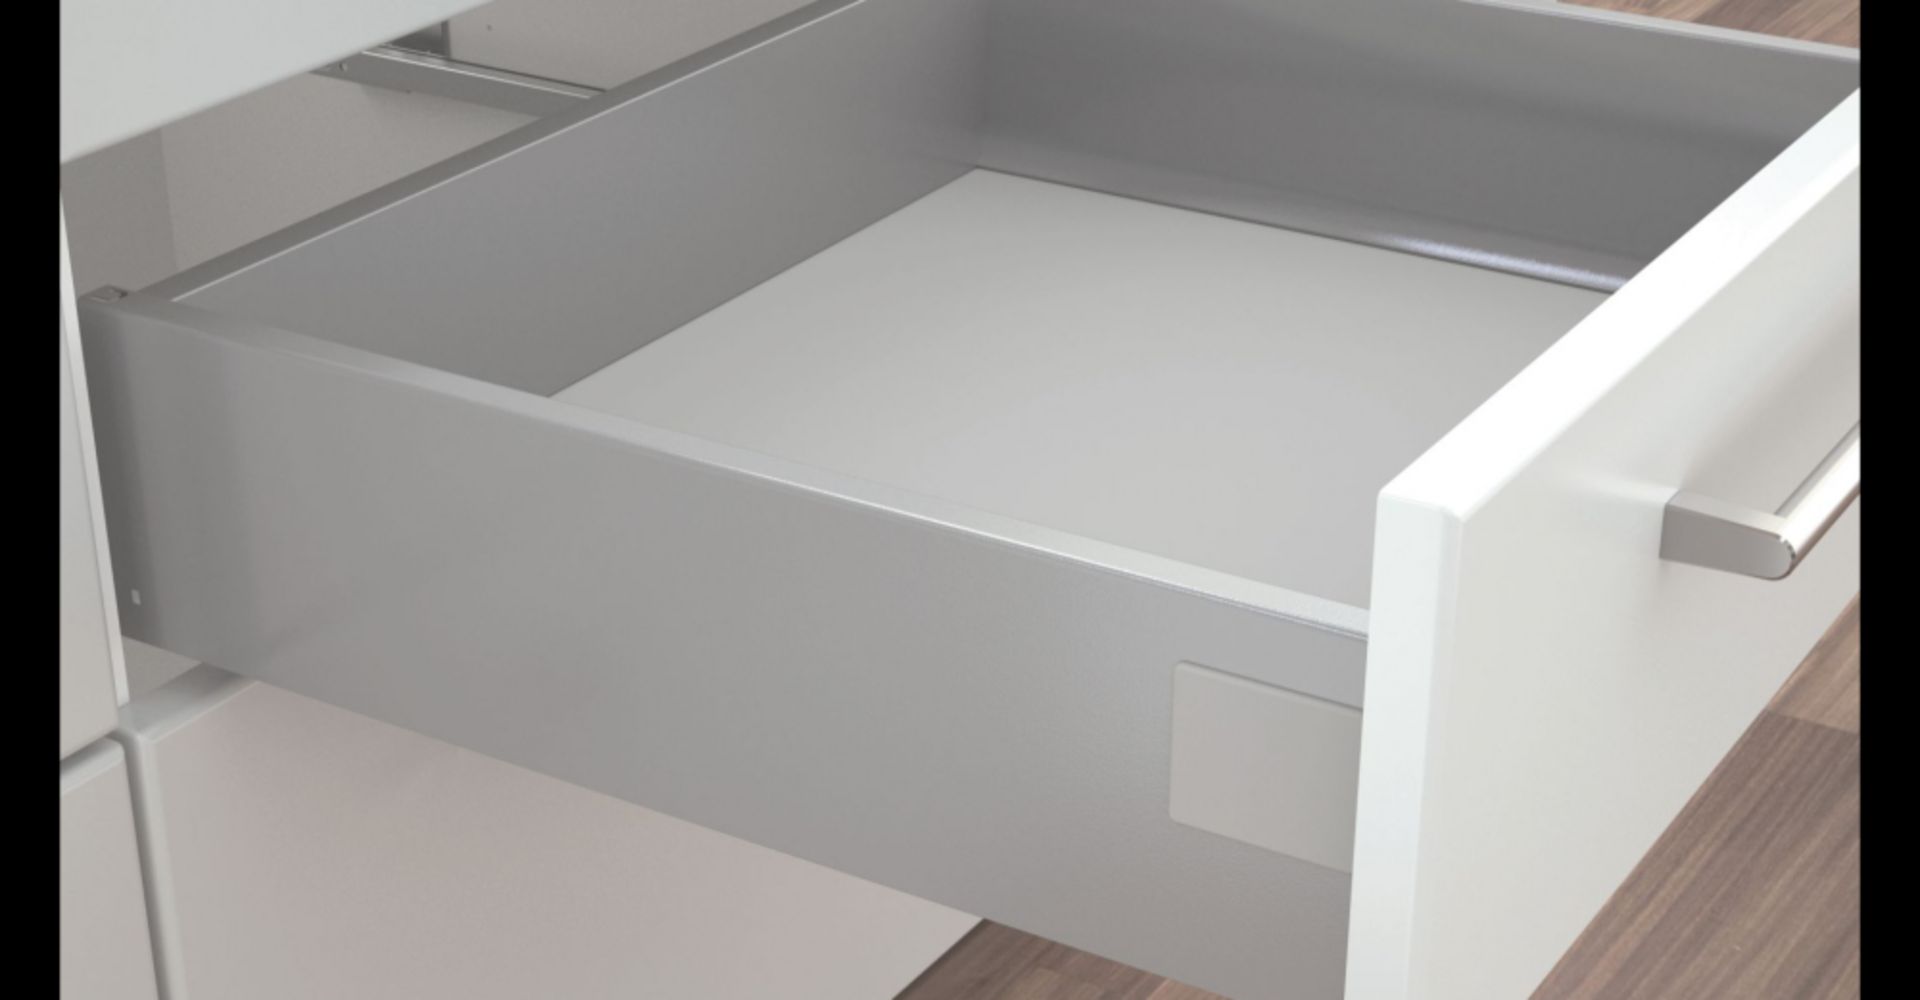 30 x 400mm Soft Close Kitchen Drawer Packs - B&Q Prestige - Brand New Stock - Features Include Metal - Image 4 of 5